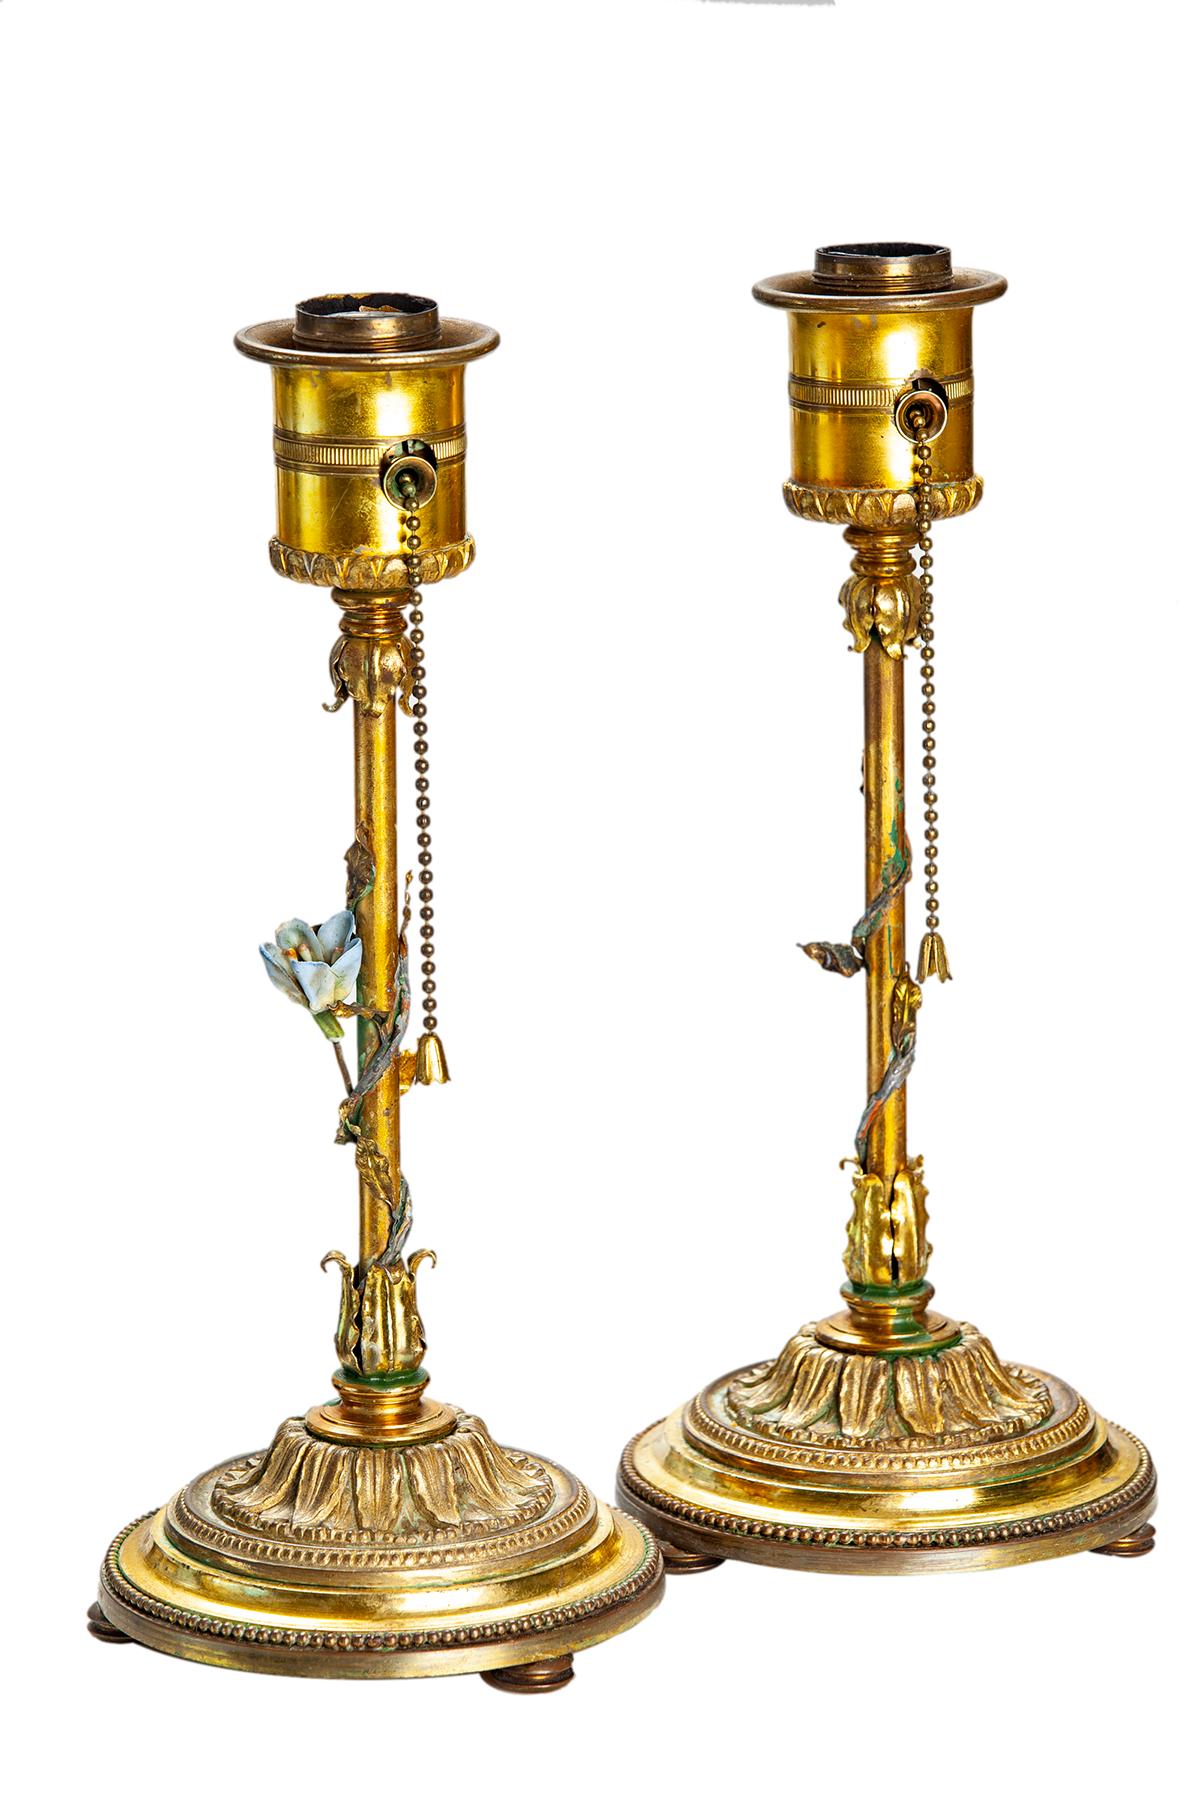 Precious bedside or vanity lamps with pull-chain & standard sized sockets.
Vine with tiny leaves & a bud wrap around the brass stem. Very heavy ornate footed bases. 
New Restoration Hardware clip on shades are available upon request.